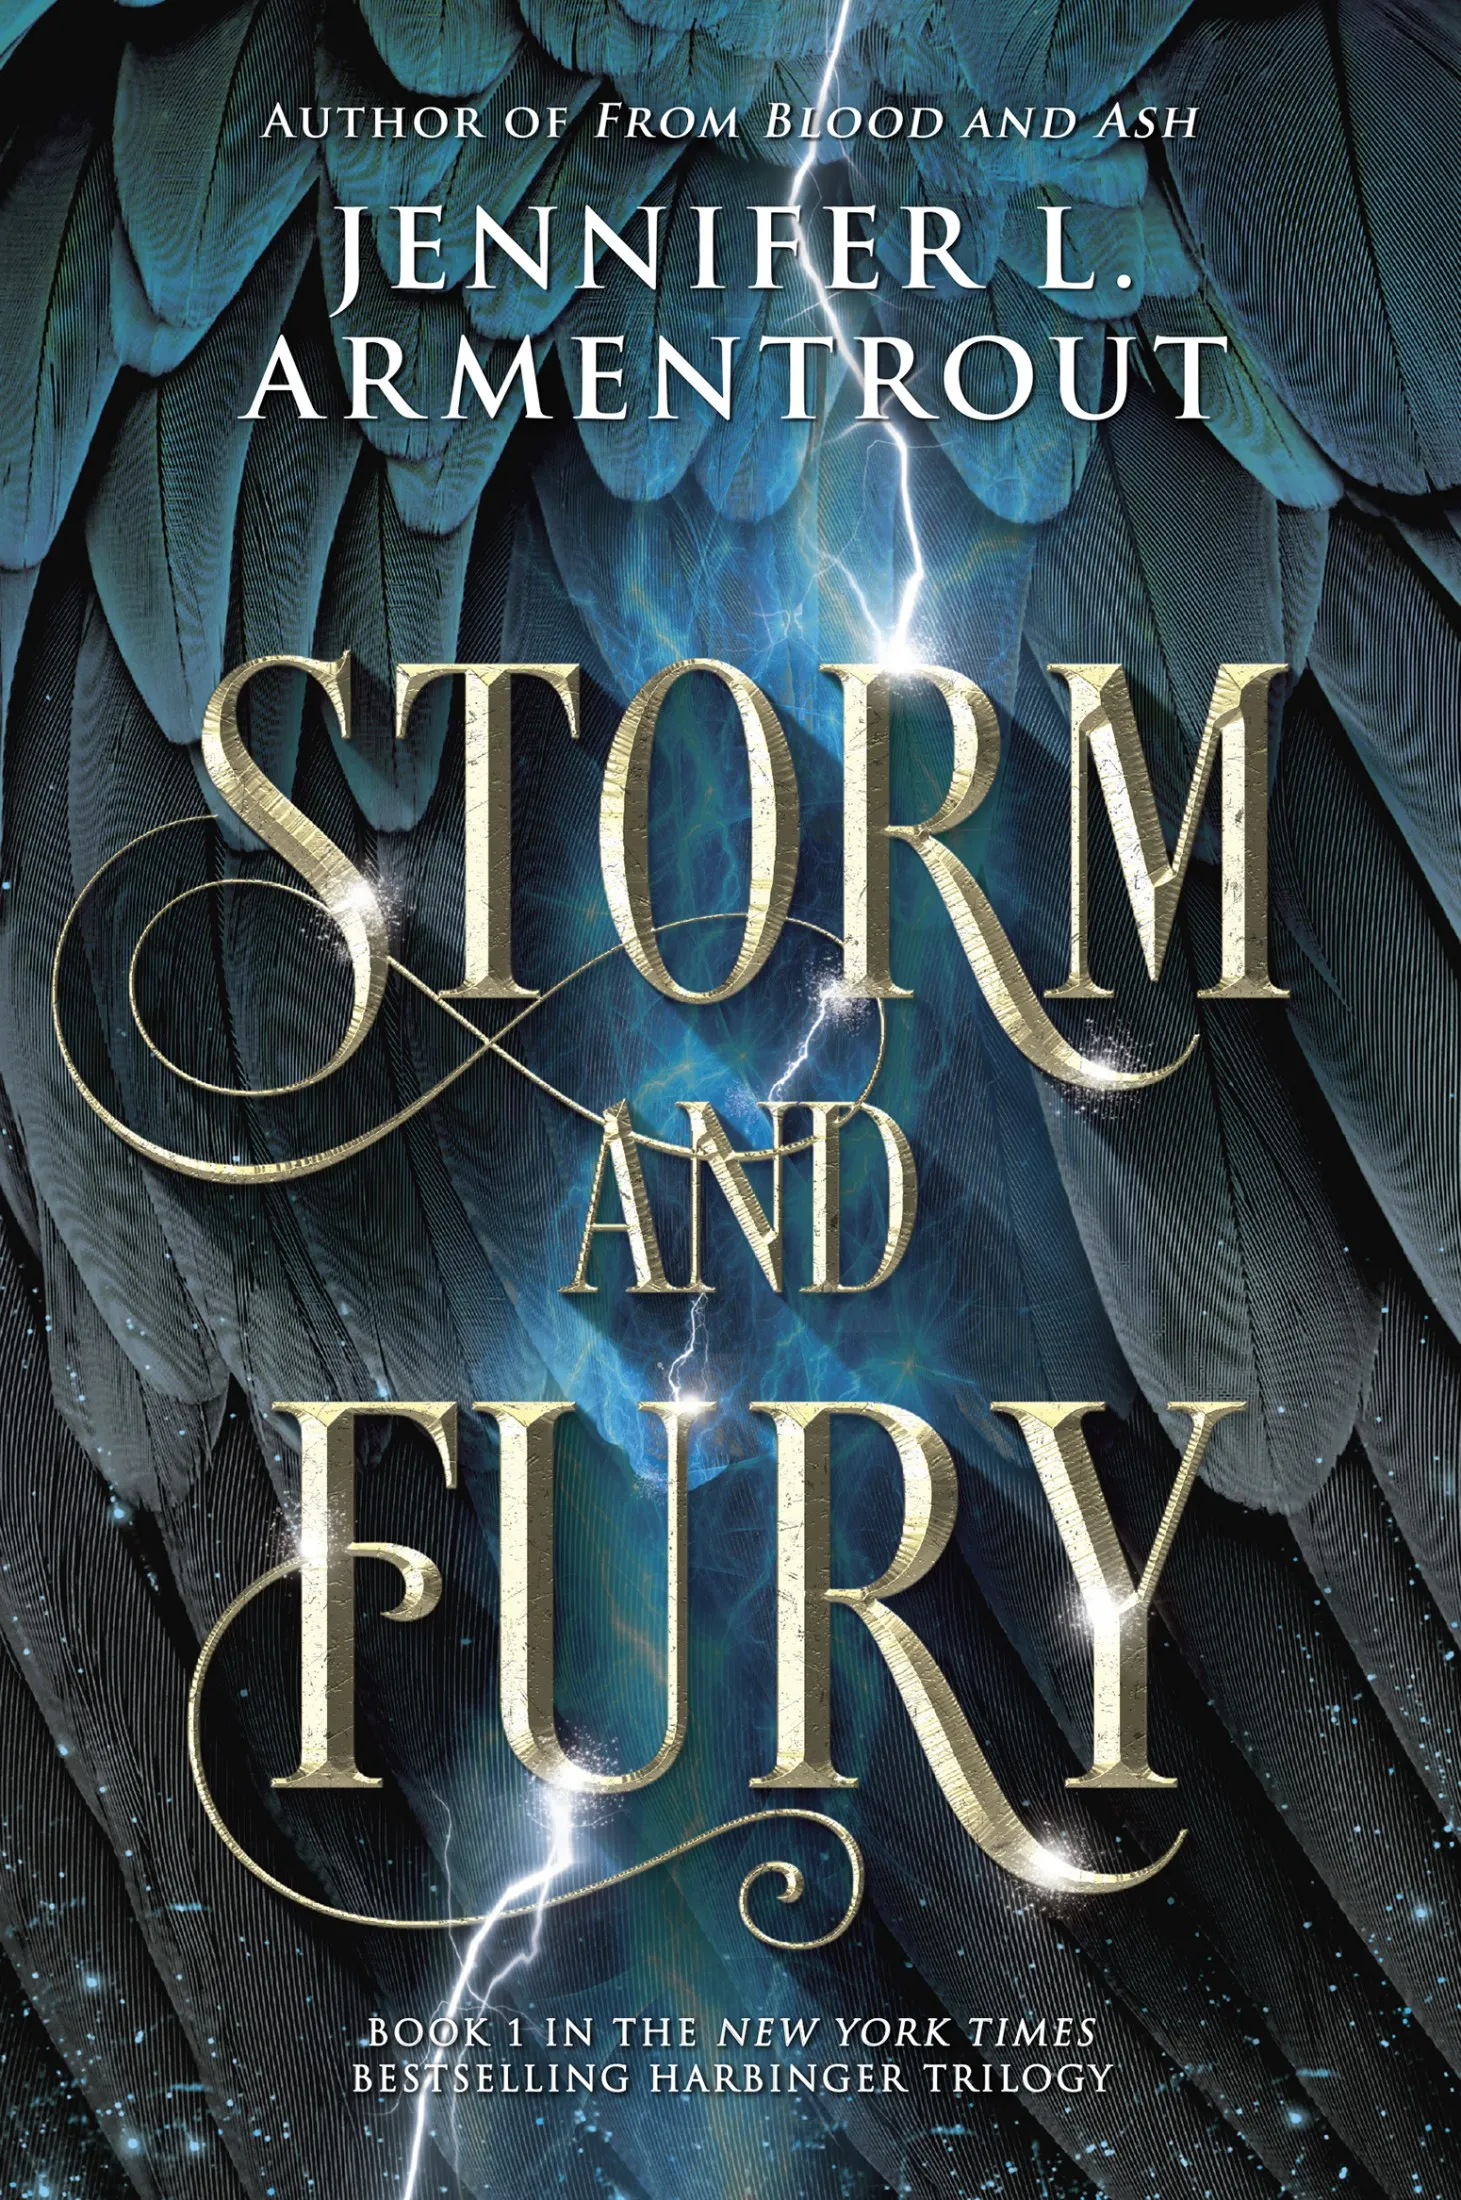 Storm and Fury (The Harbinger #1)